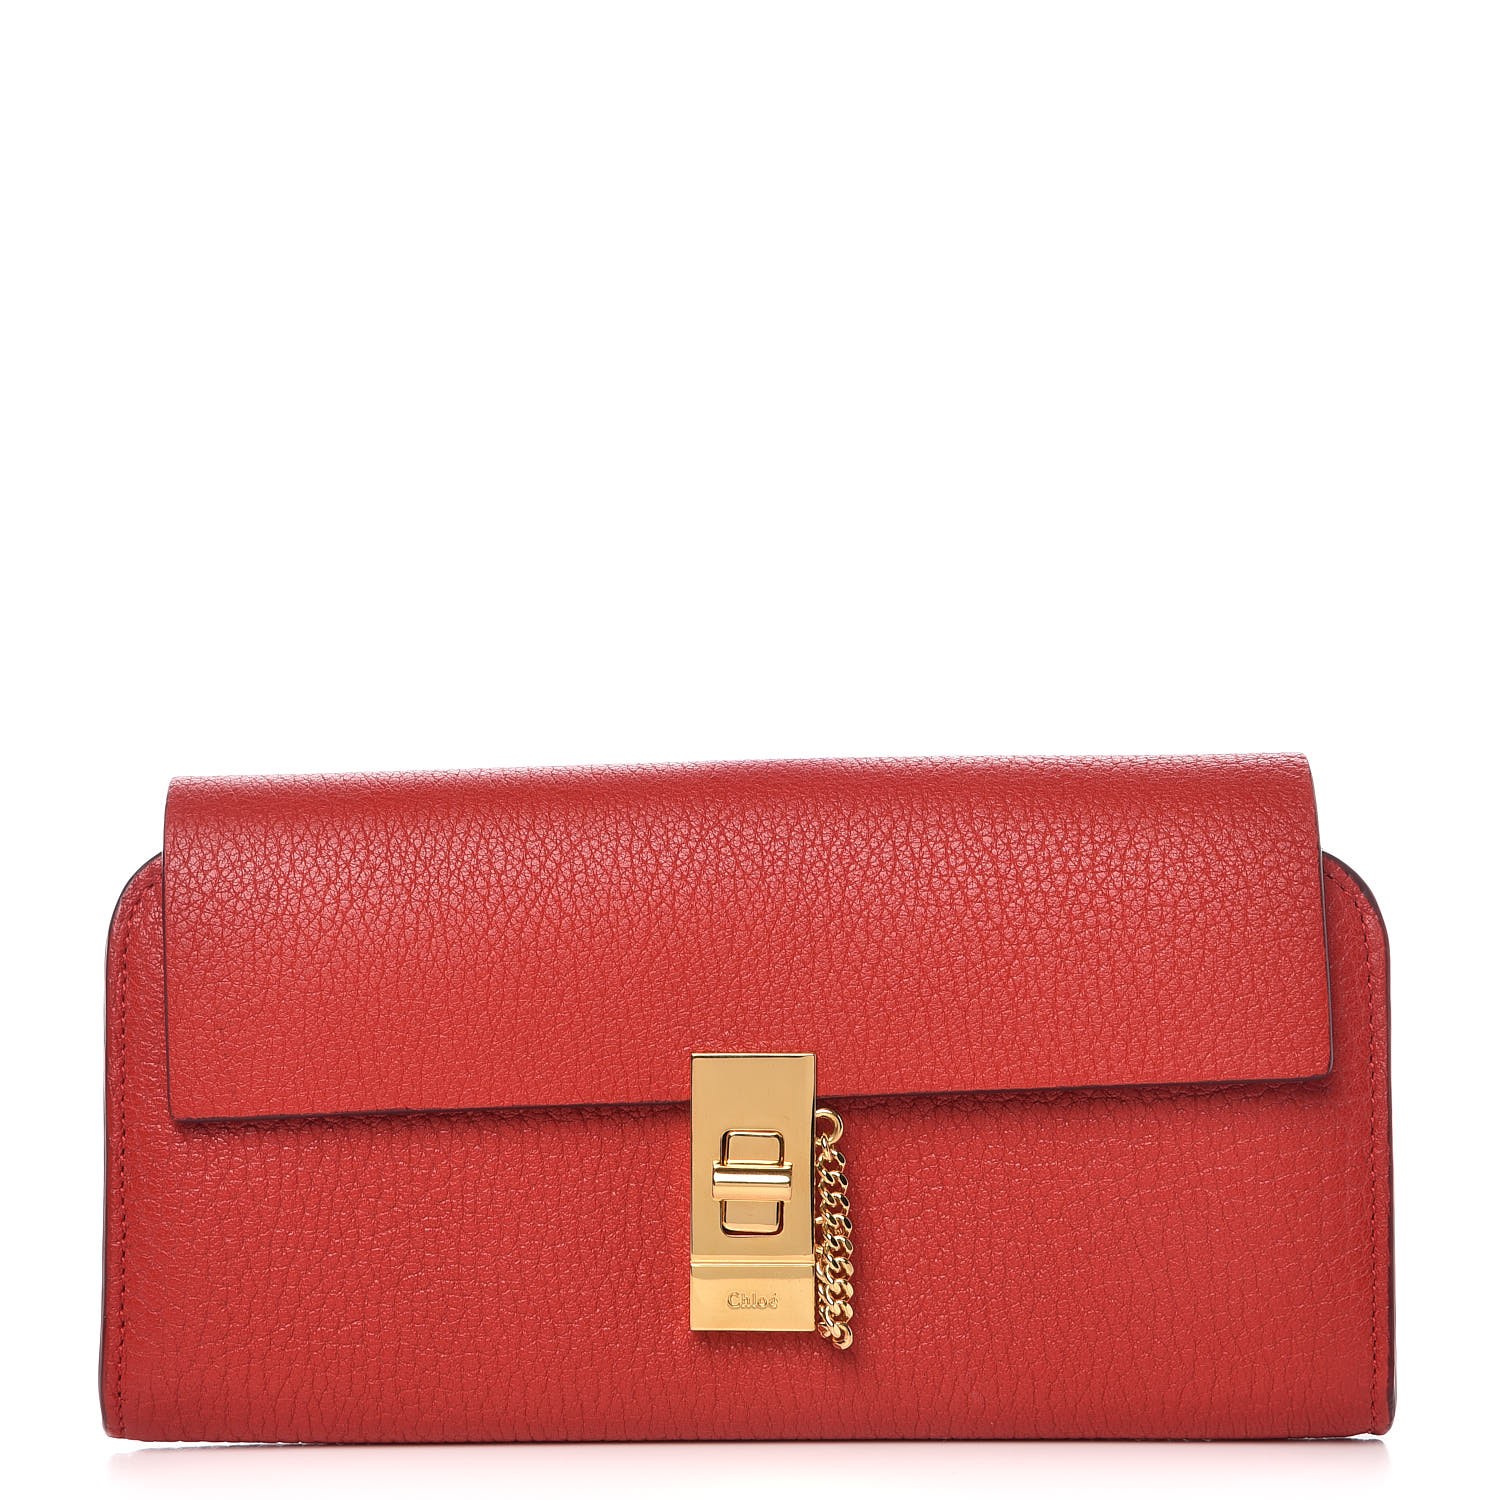 CHLOE Grained Lambskin Drew Long Wallet with Flap Plaid Red 311244 ...